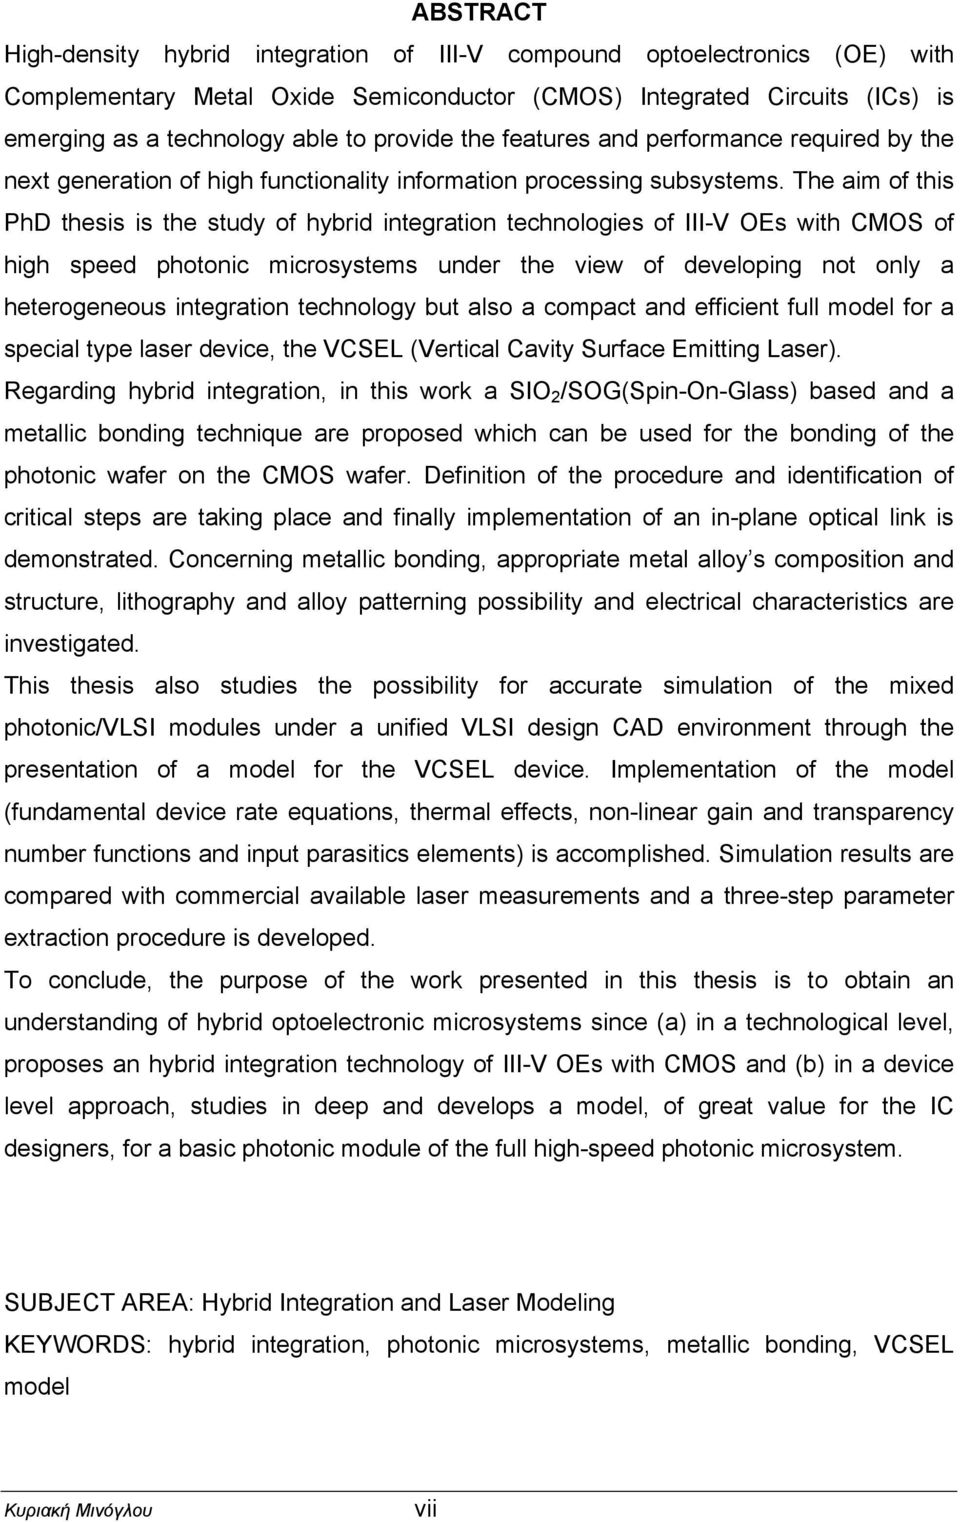 The aim of this PhD thesis is the study of hybrid integration technologies of III-V OEs with CMOS of high speed photonic microsystems under the view of developing not only a heterogeneous integration